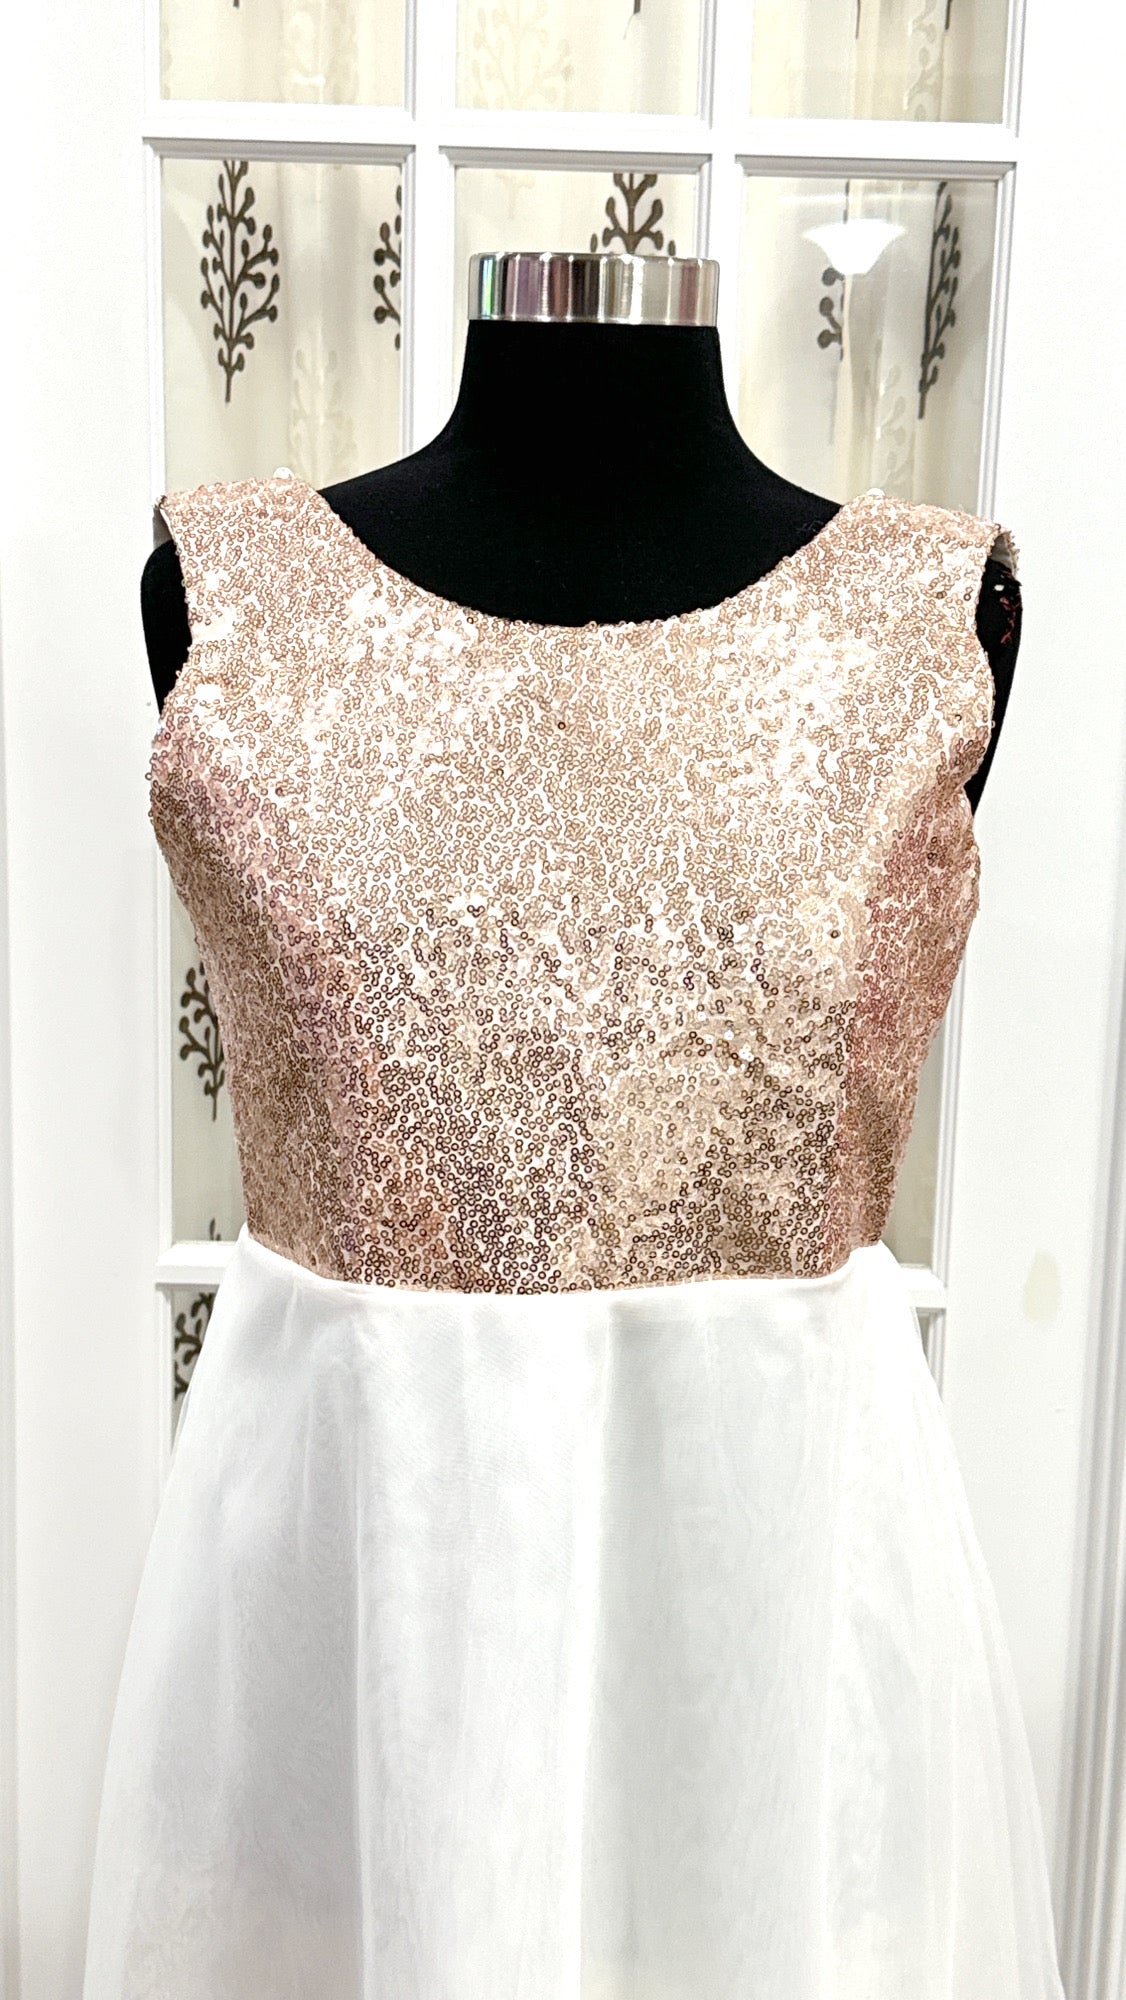 Rose Gold sequin top Partywear Maxi Long Flowy Dress dress with V Neck Back beaded embellishments.
Size 34 in length 46 in